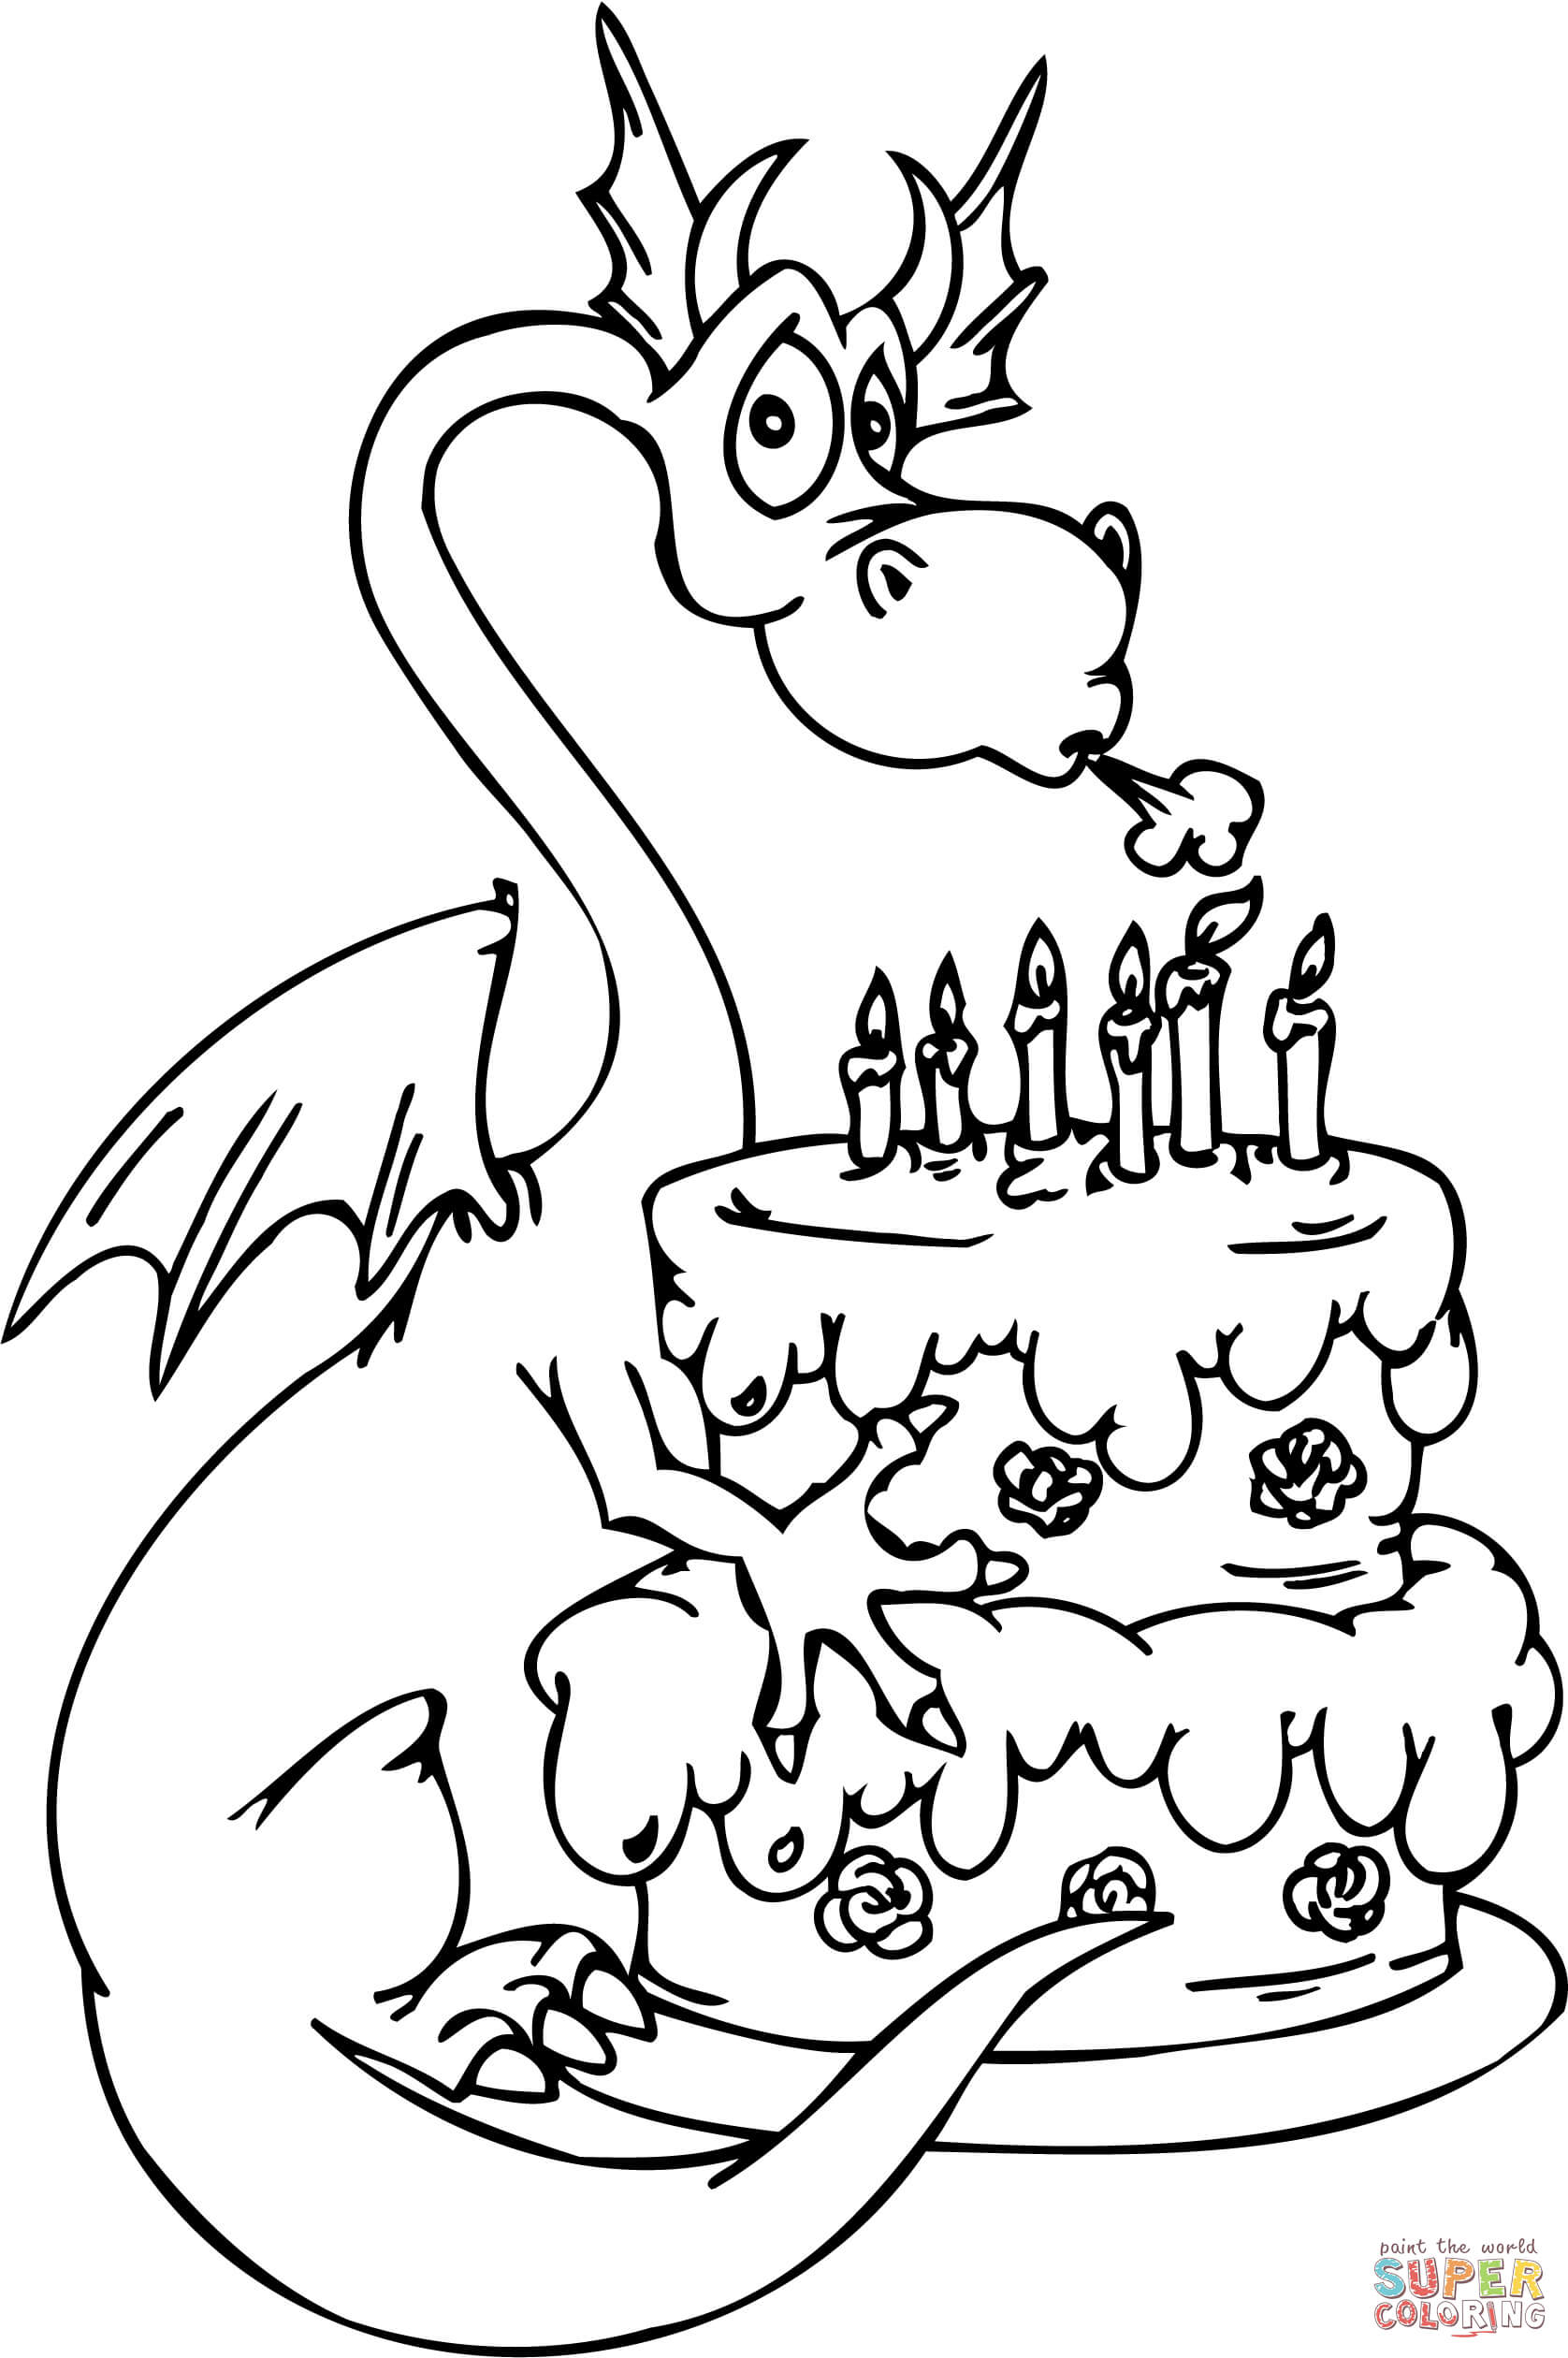 birthdays coloring pages c0lorcom. cake happy birthday party ...